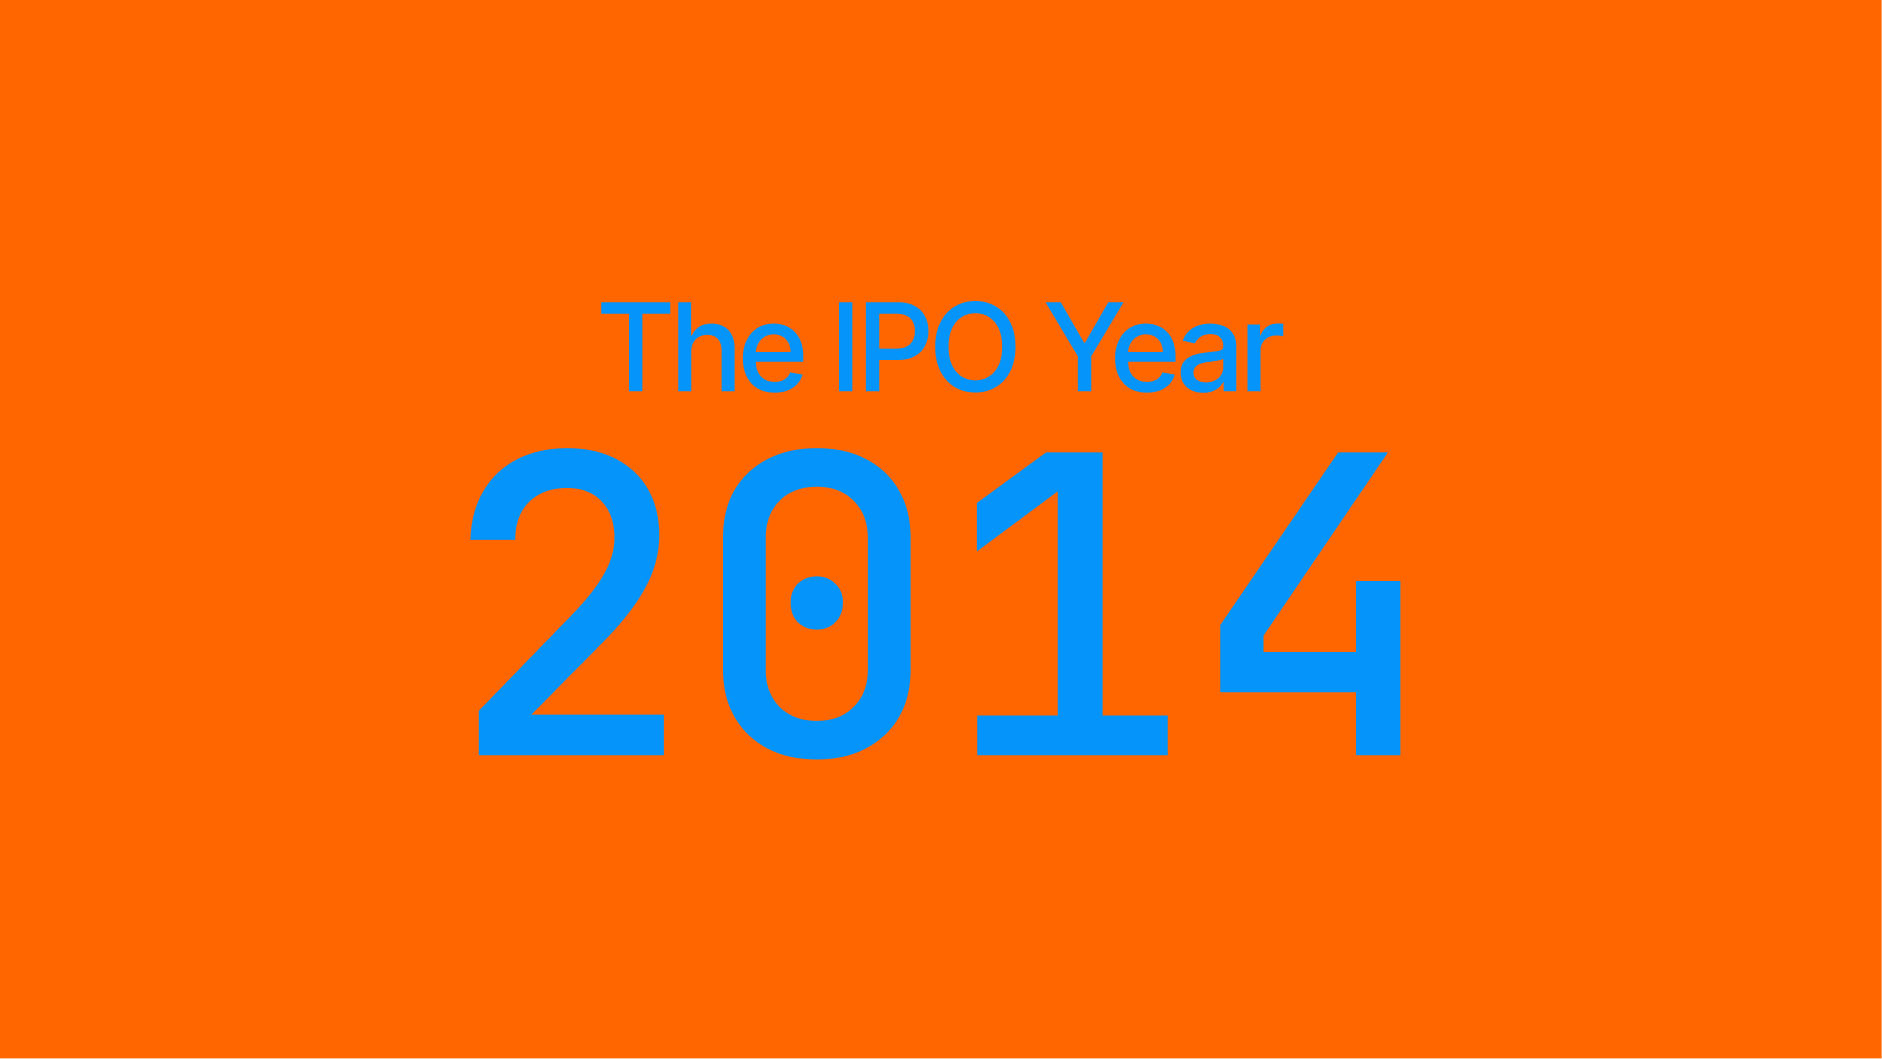 Initial Public Offerings - IPOs in 2014